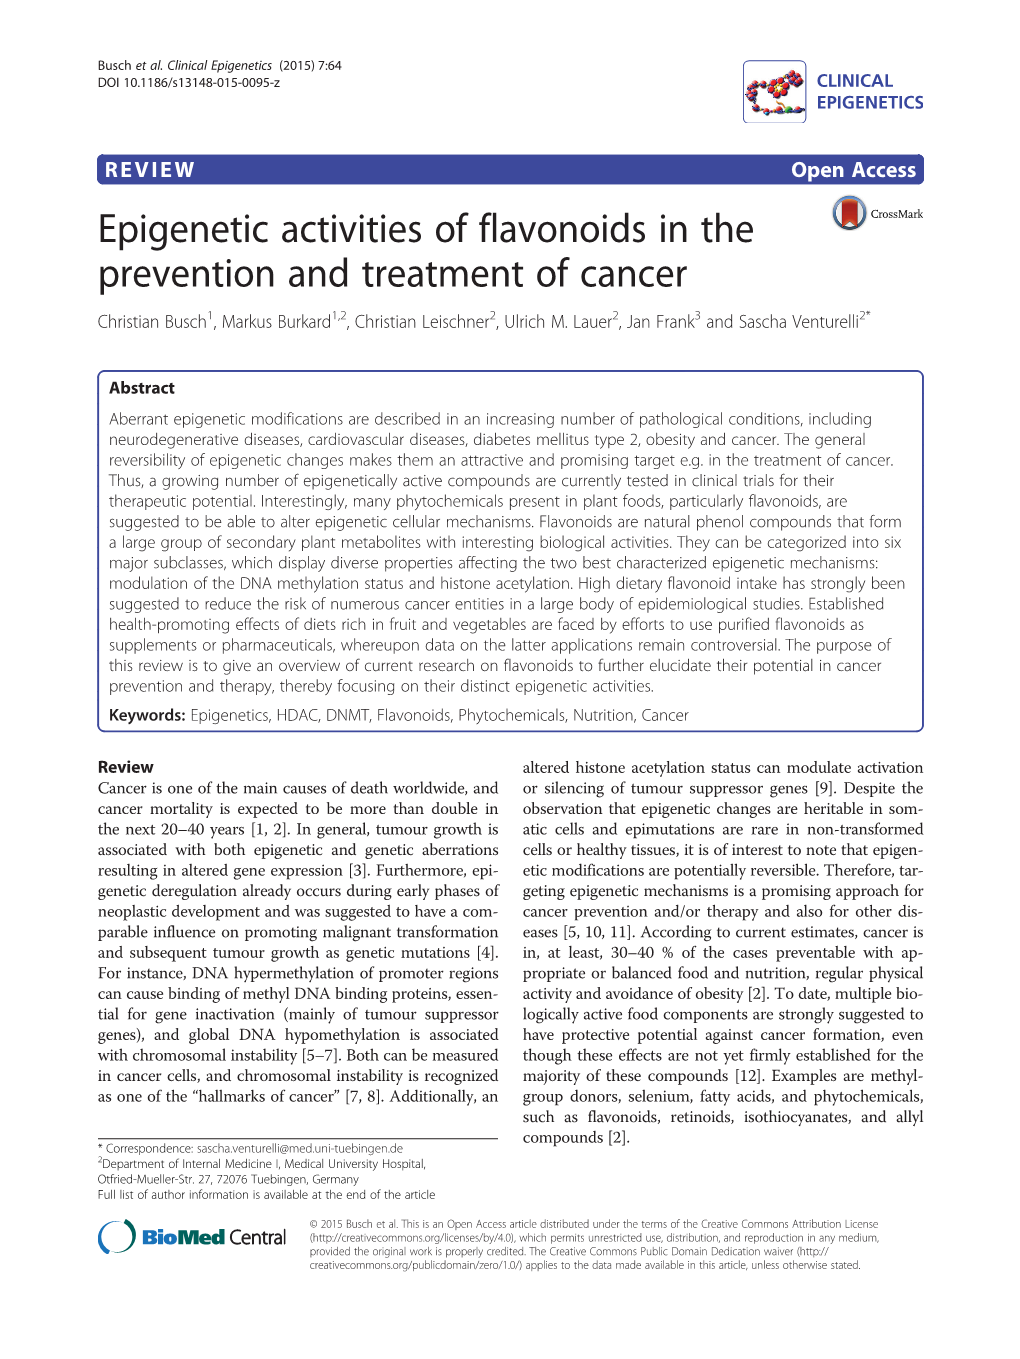 Epigenetic Activities of Flavonoids in the Prevention and Treatment of Cancer Christian Busch1, Markus Burkard1,2, Christian Leischner2, Ulrich M